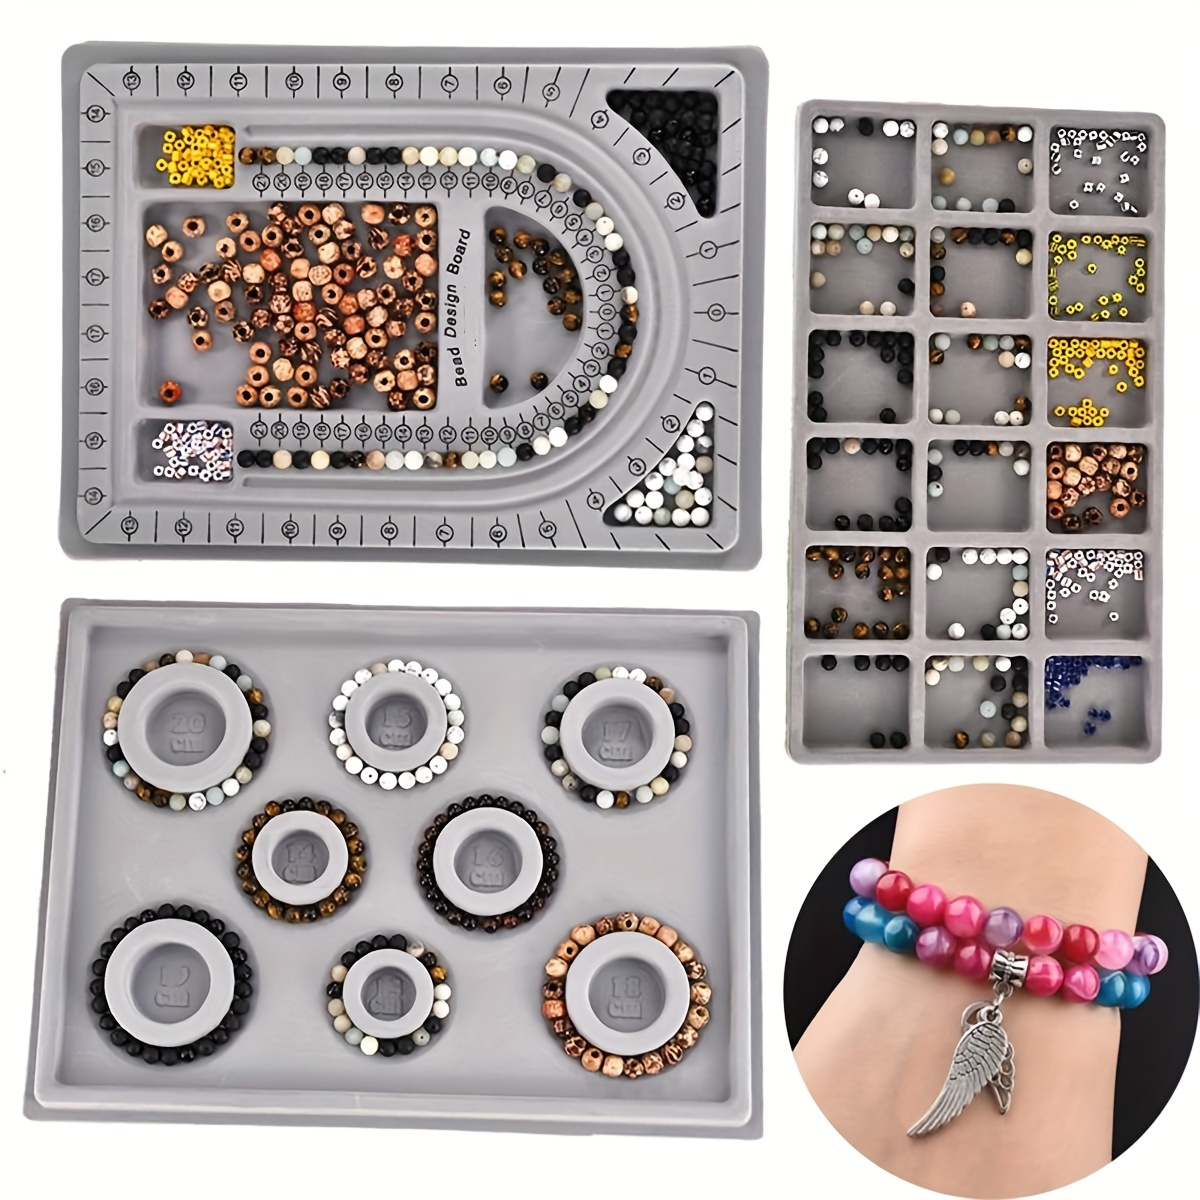 MOUMOUTEN Bead Board, Necklace Beading Jewelry Organiser Tray DIY Craft  Tool Necessary for Professional to String Beads Boards Accessories Hand  Making